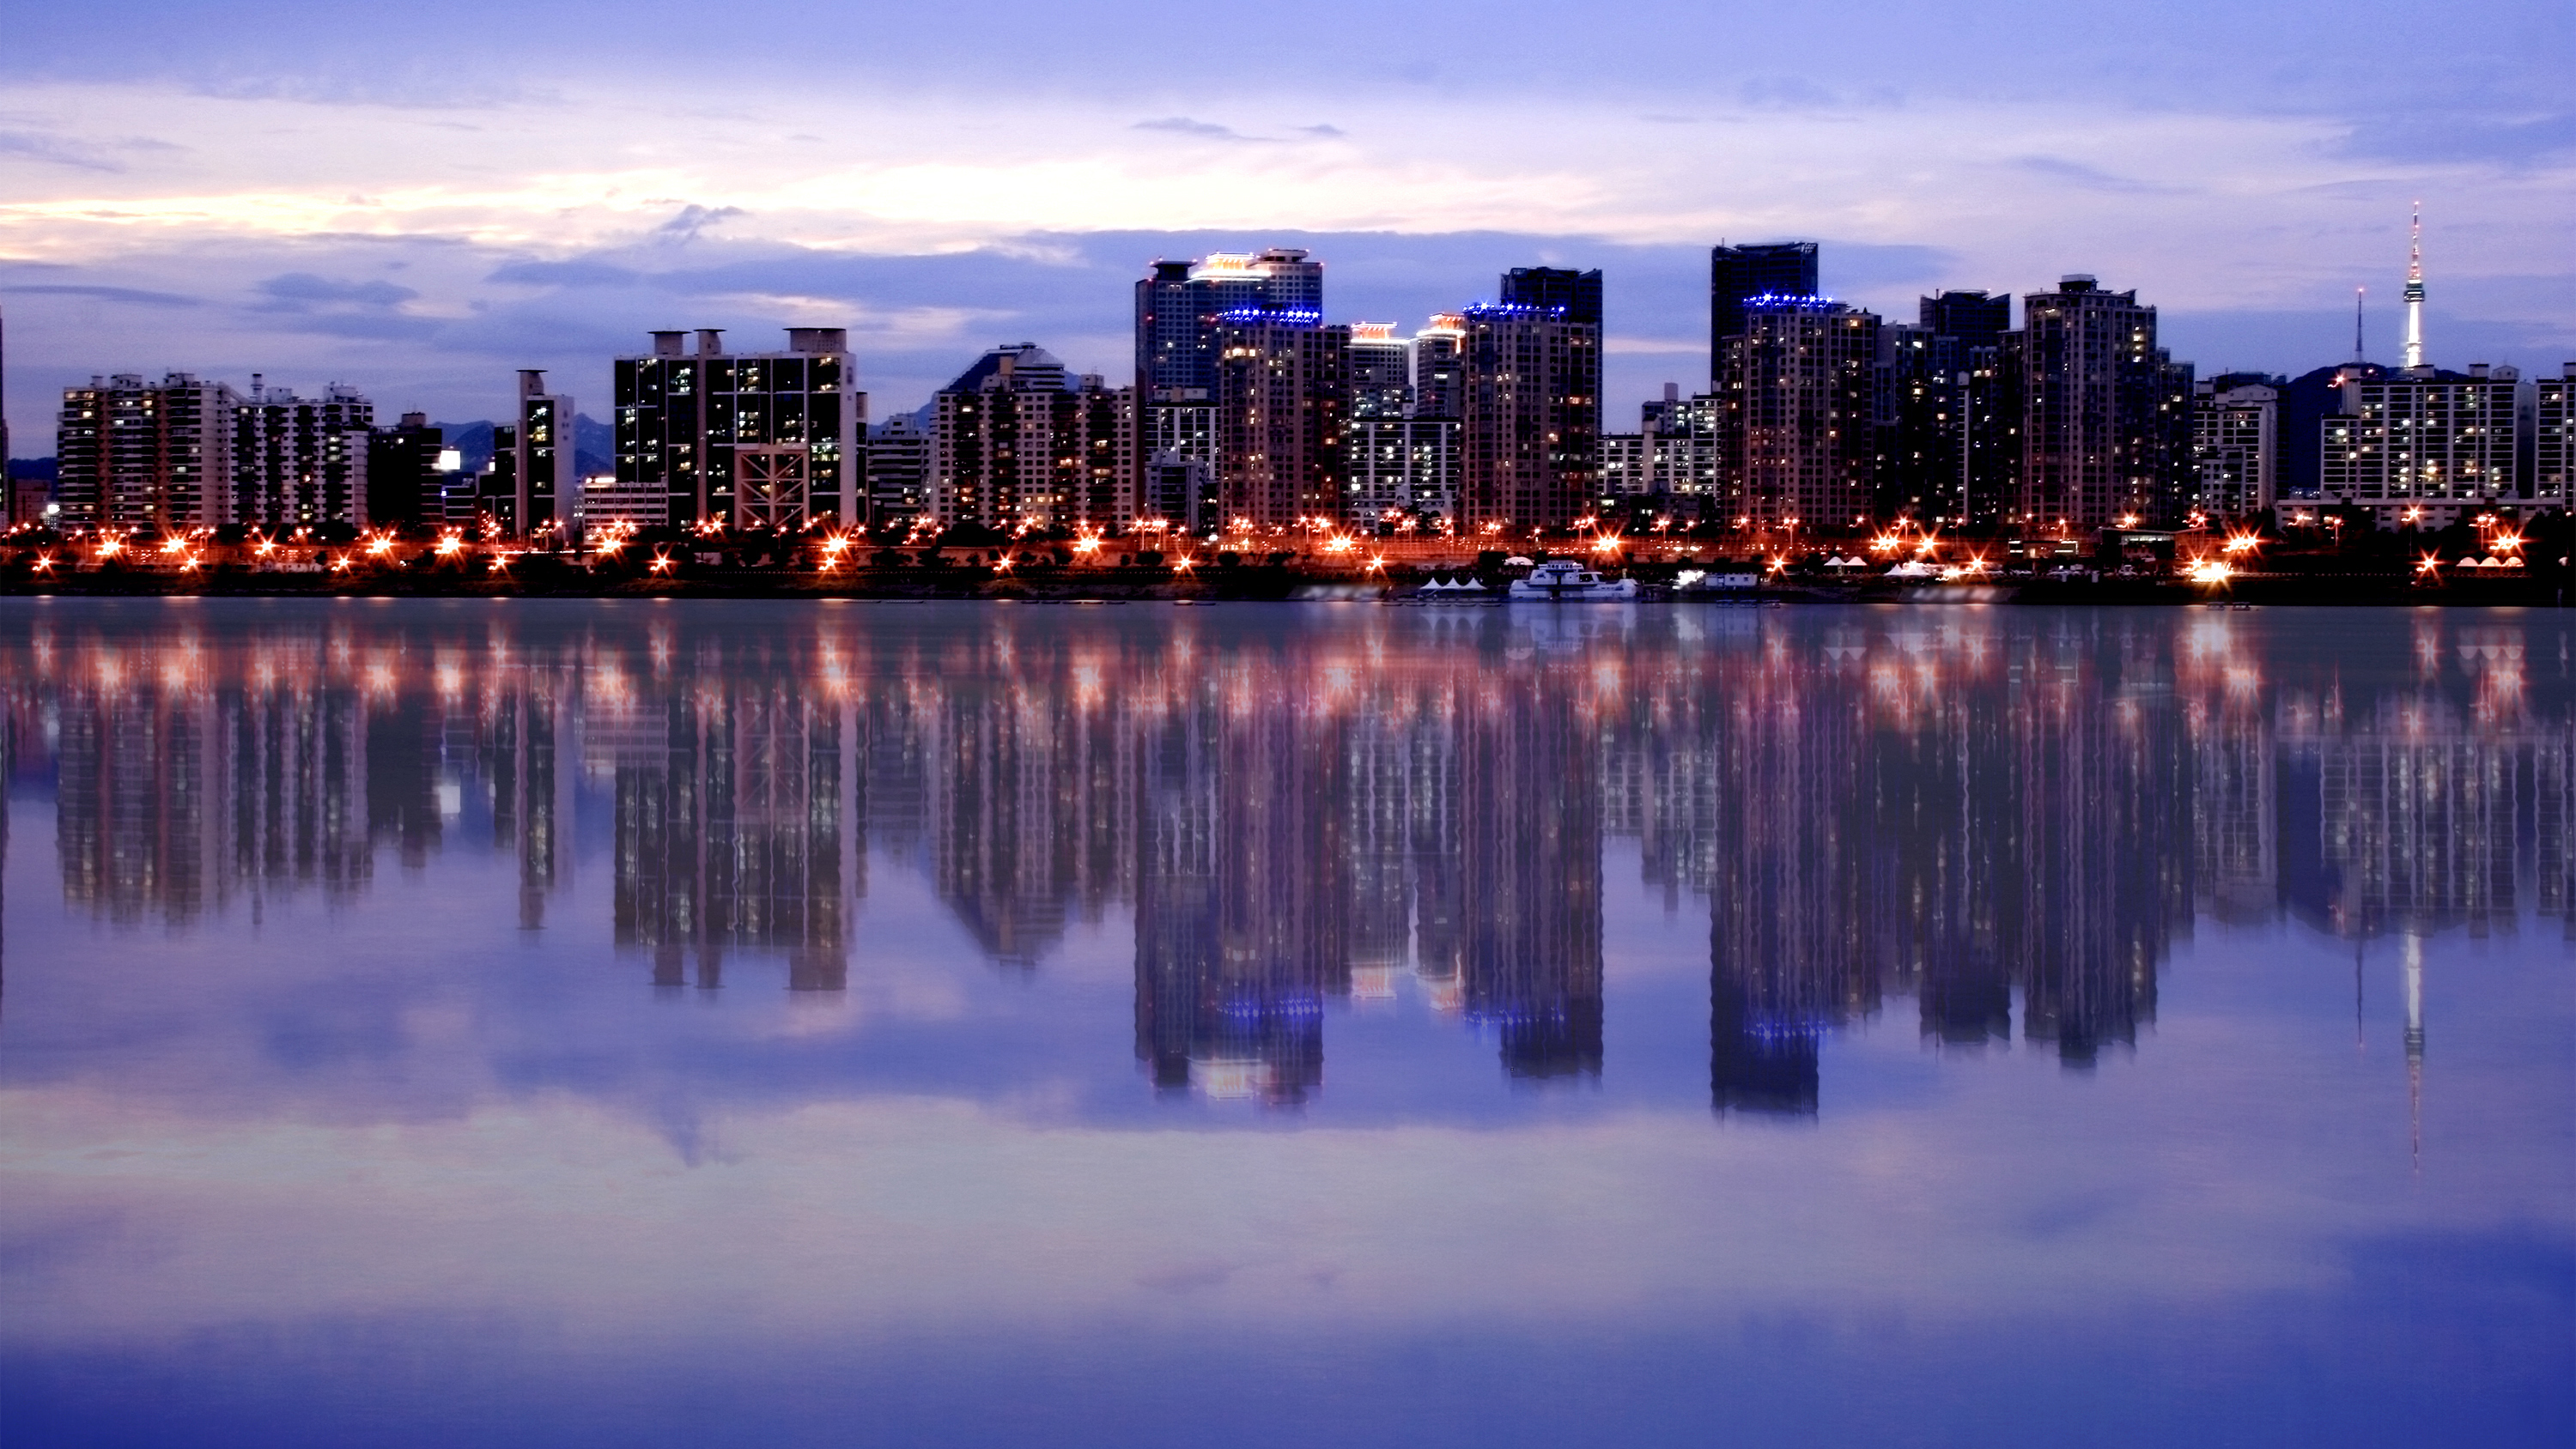 Seoul Skyline Majestic reflection at Han River; Shutterstock ID 9704323; Purchase Order: NA; Job: Property Journal June 2021; Client/Licensee: RICS